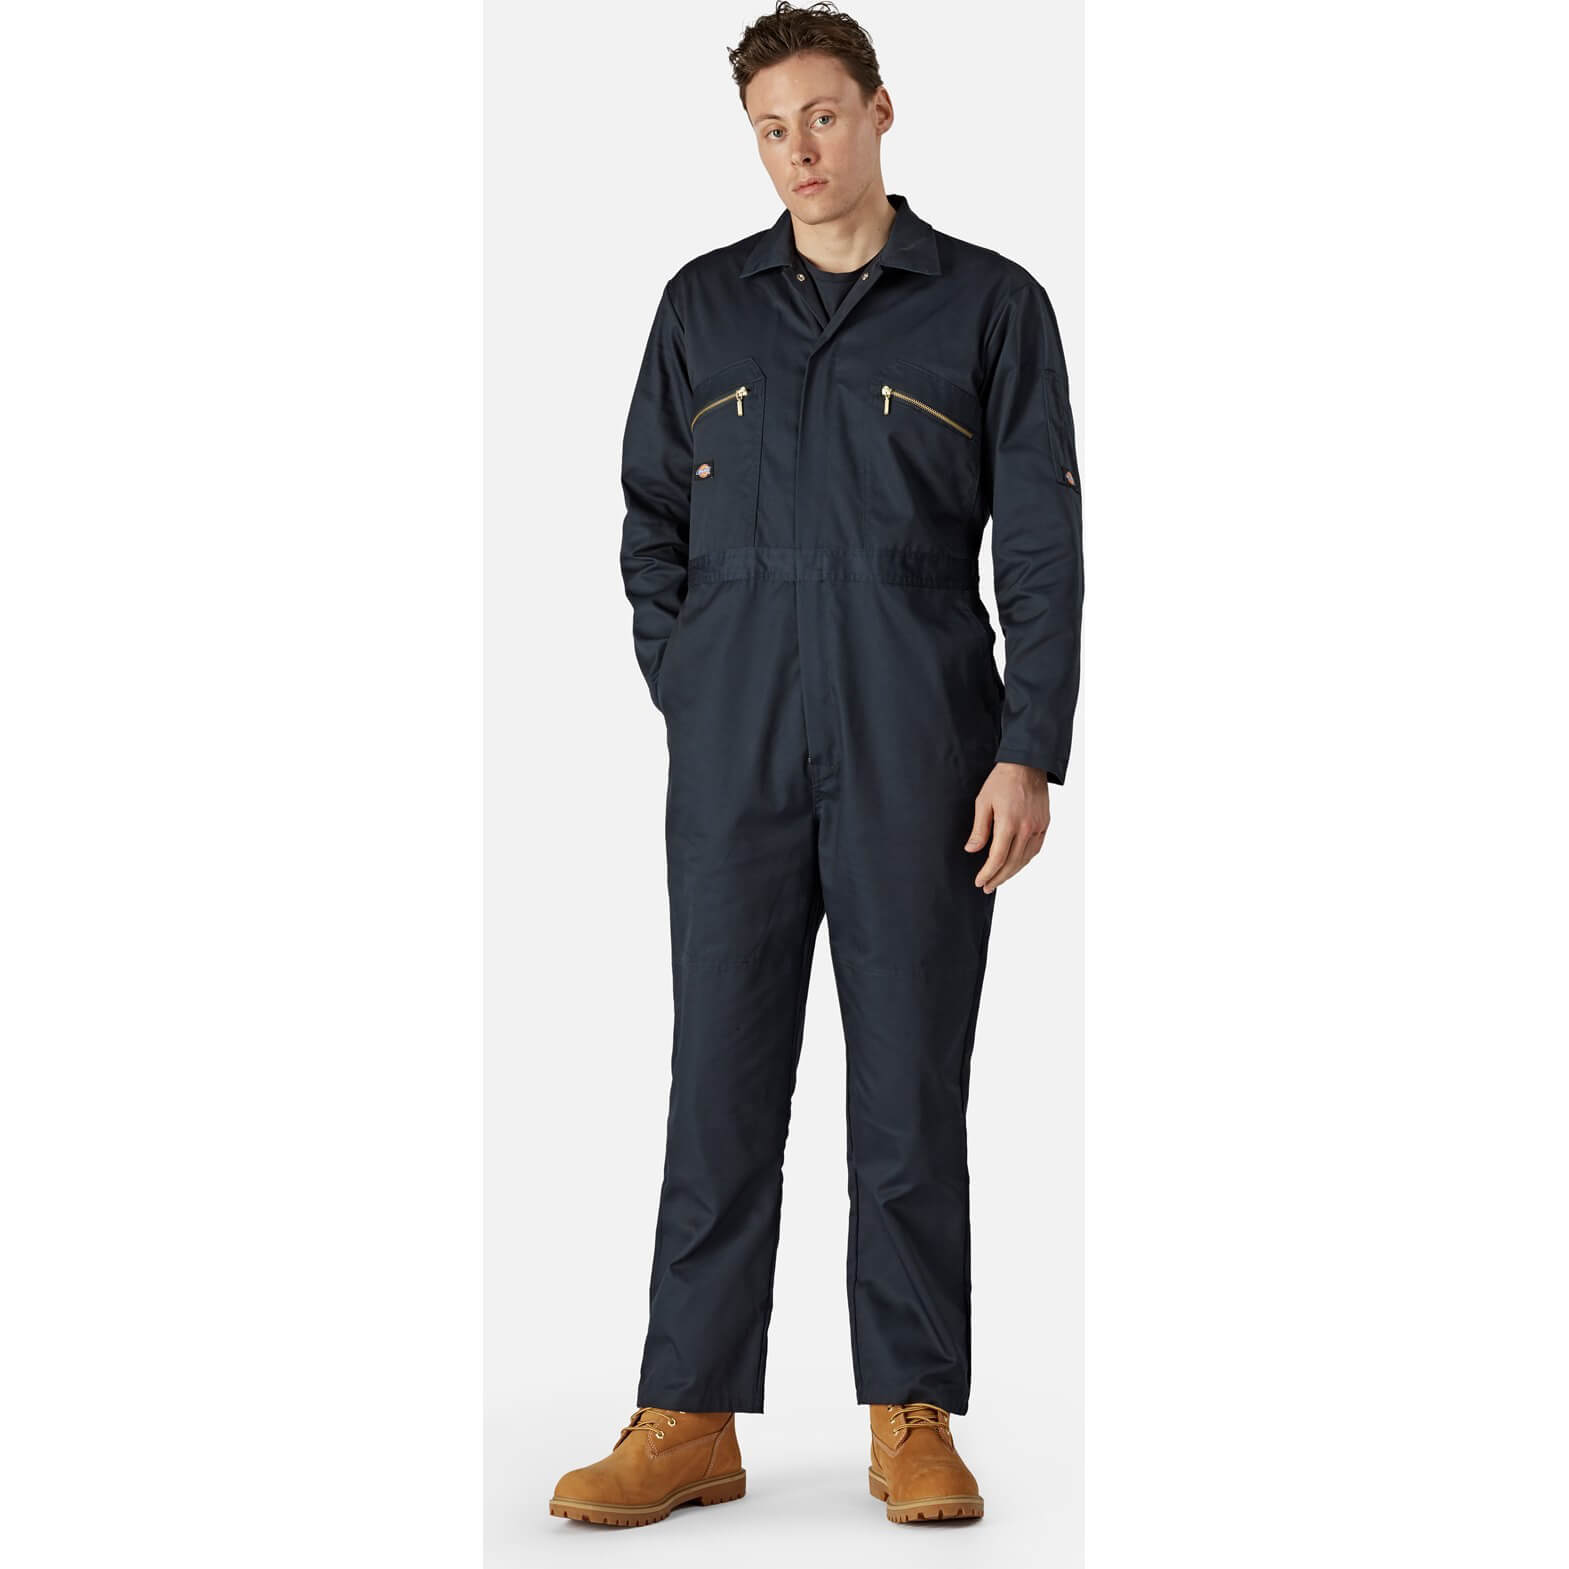 Image of Dickies Redhawk Coverall Overall Navy Blue 2XL